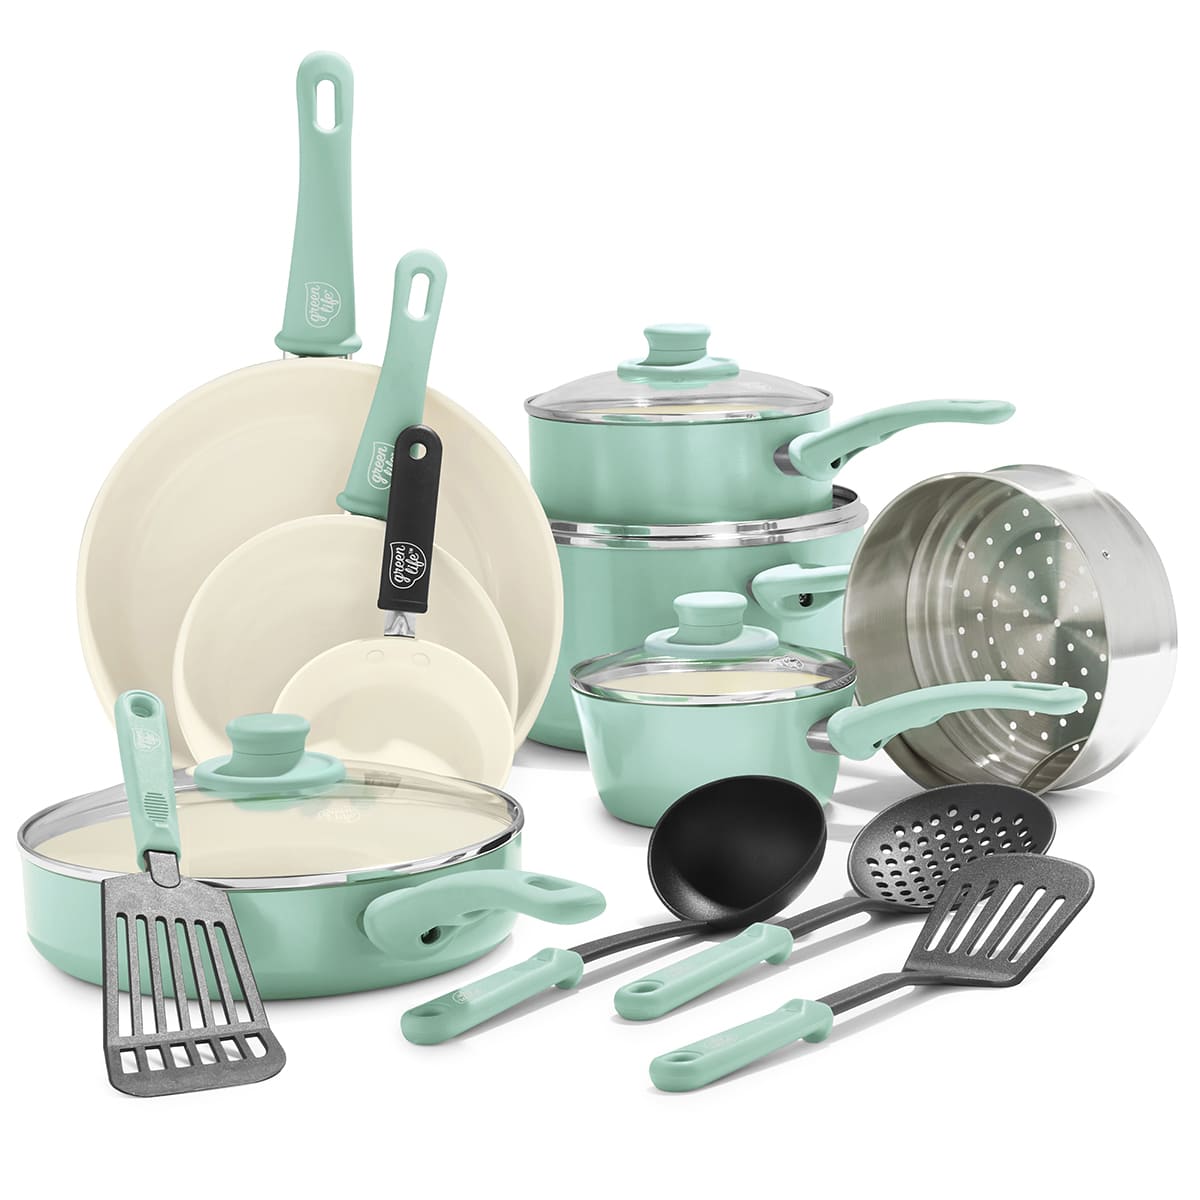 GreenLife Soft Grip<br> SOFT GRIP 16PC COOKWARE SETS, TURQUOISE